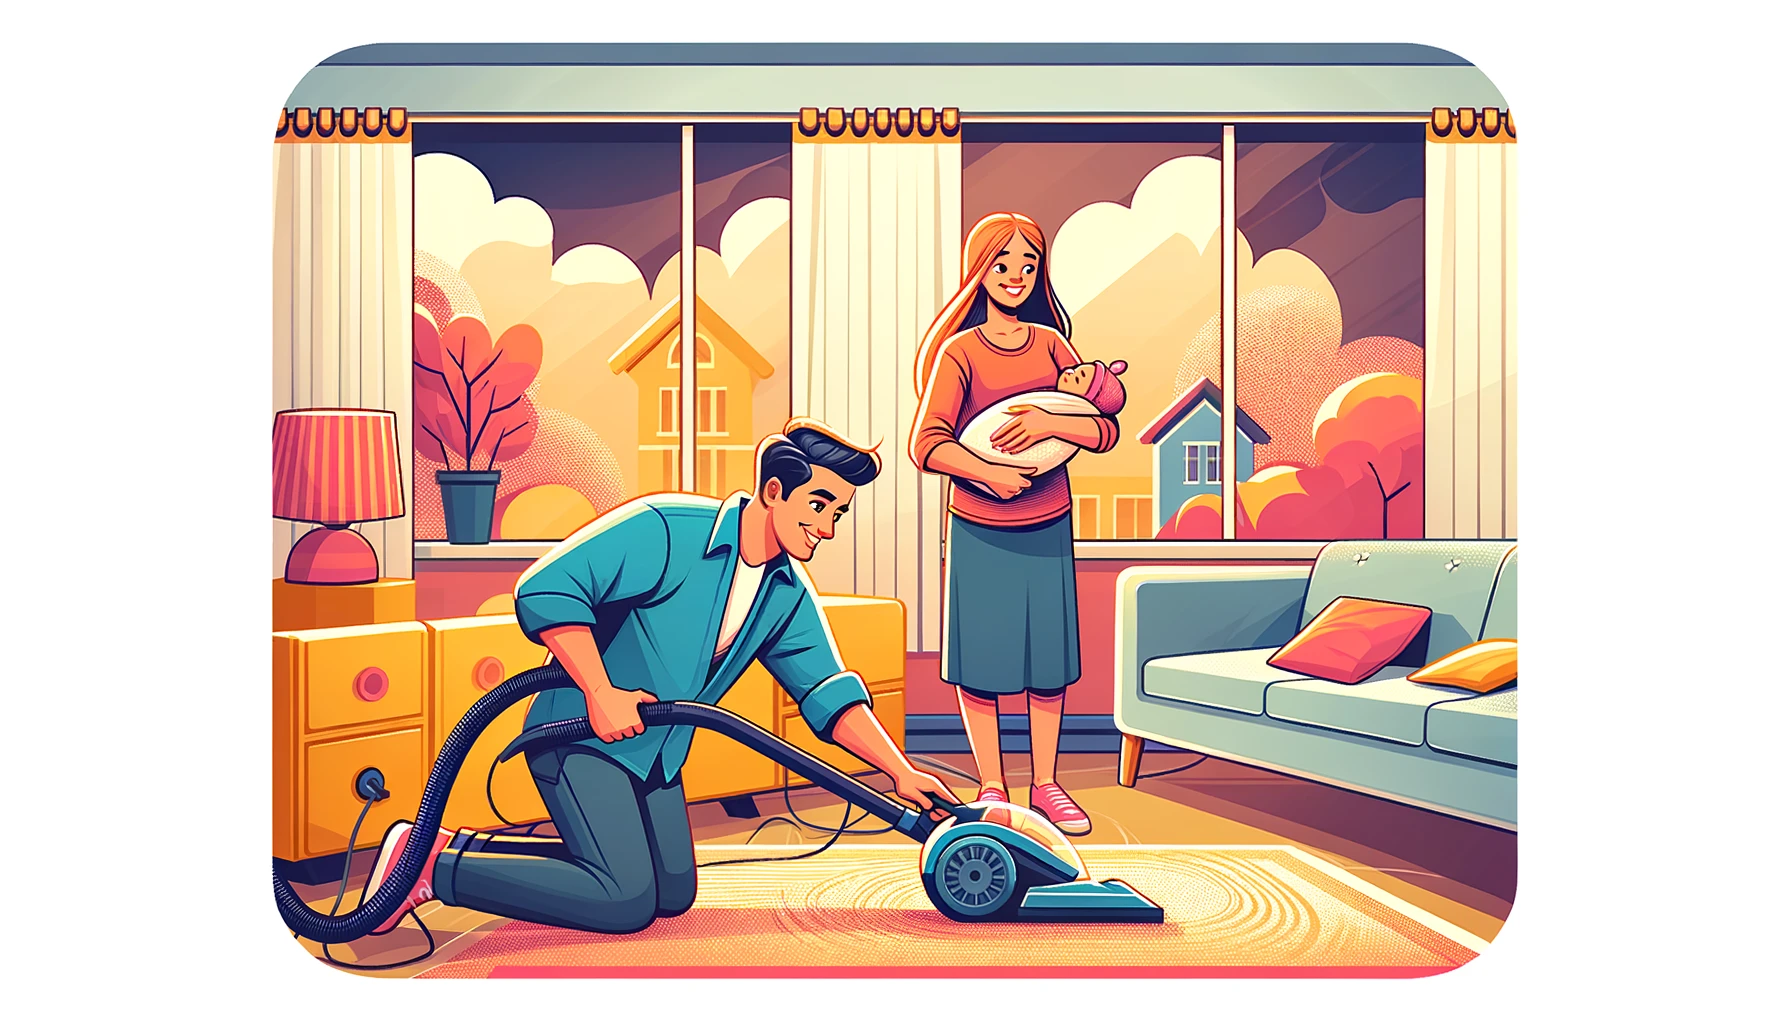 An illustrative image of a father helping with household chores to support the mother after childbirth, in a stylized and colorful art style, depicted in a wide horizontal format. The father is shown vacuuming the living room, while the mother, holding a newborn, watches with a smile. The scene is depicted in a warm, inviting, and cartoonish style, emphasizing a sense of teamwork and family support in a cozy home setting.